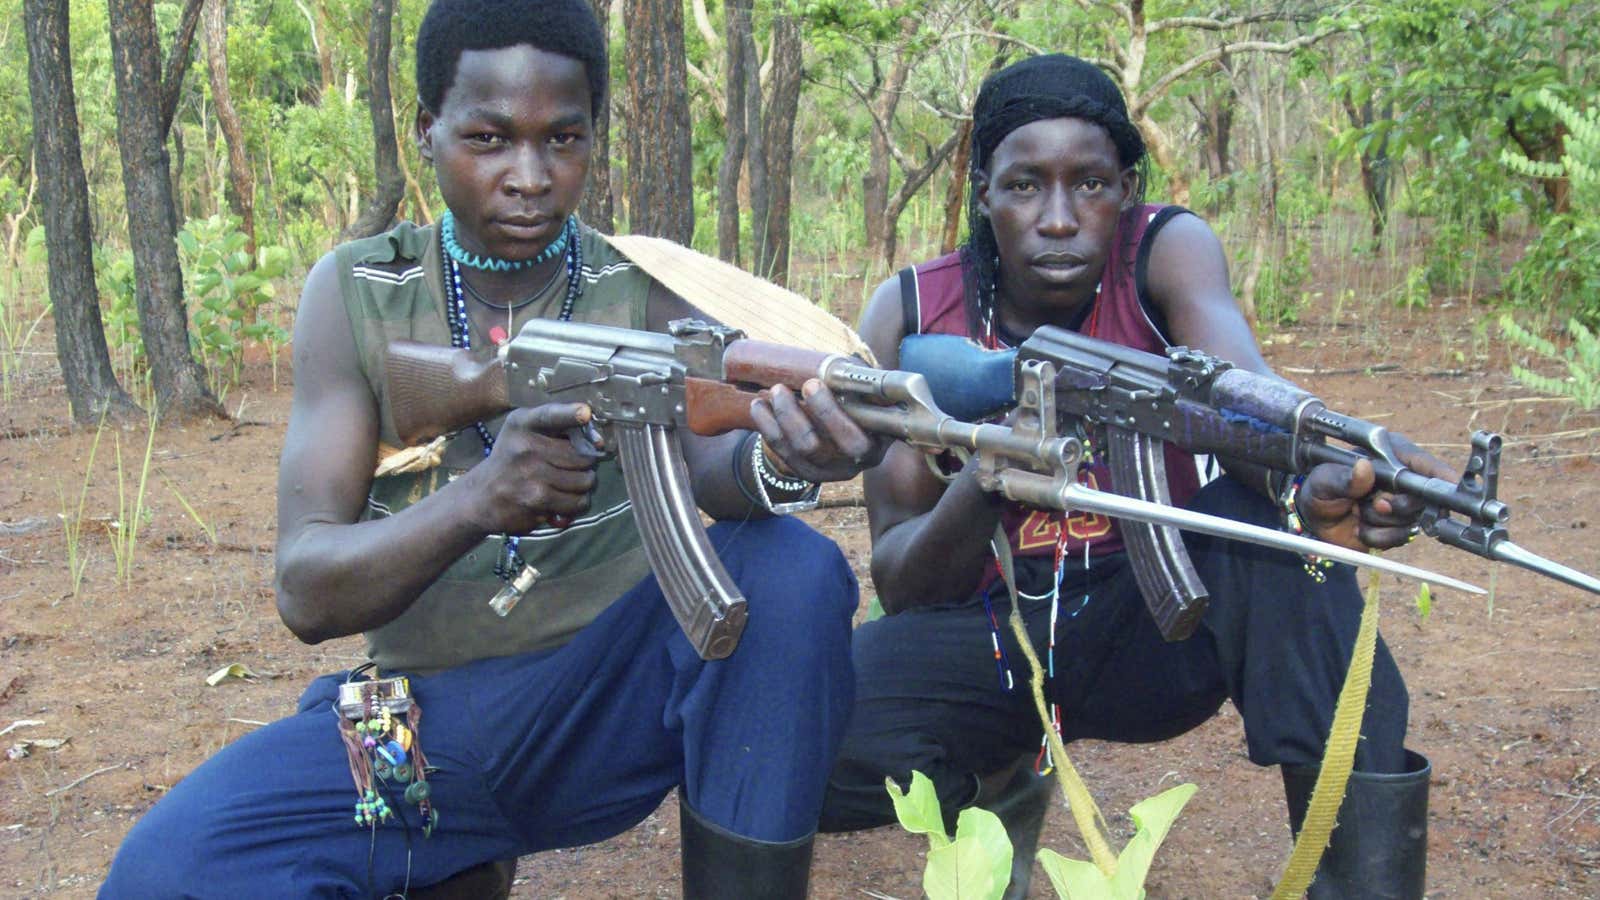 “The LRA has abducted 30,000 child soldiers and killed more than 100,000 civilians.”